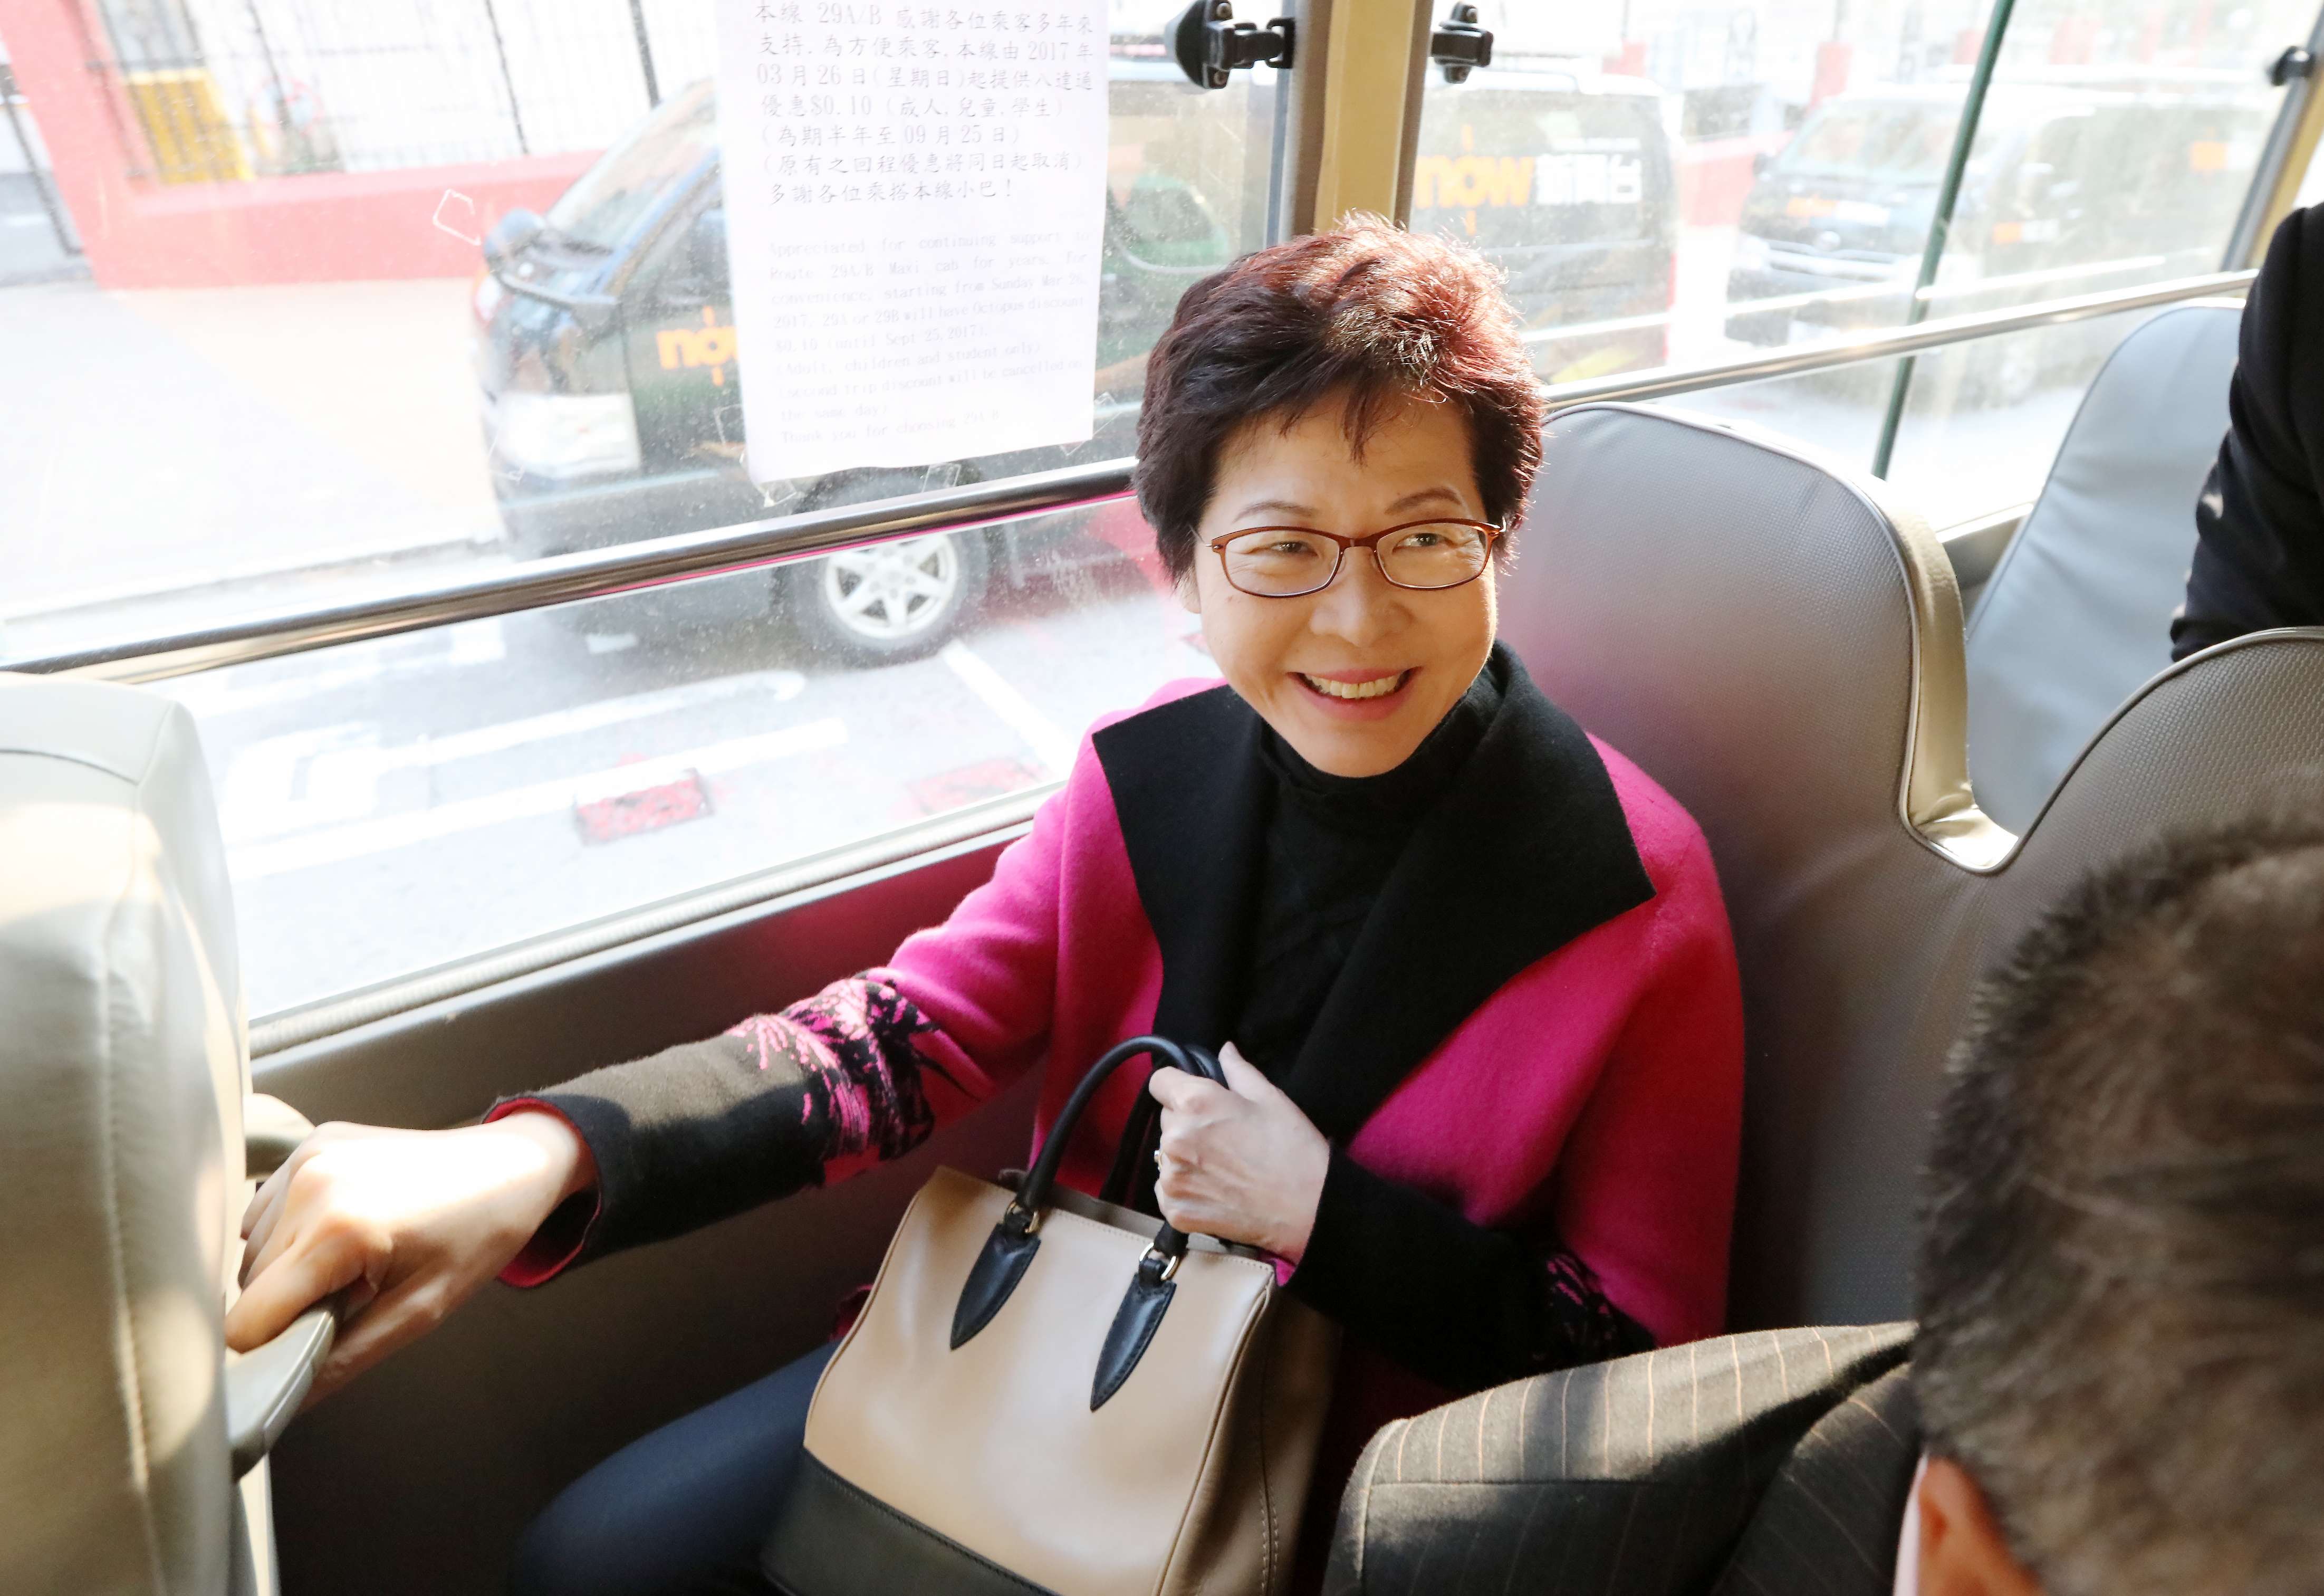 Chief executive-elect Carrie Lam arrives in Kowloon Tong on a minibus for her interview last week at Commercial Radio. Photo: Felix Wong